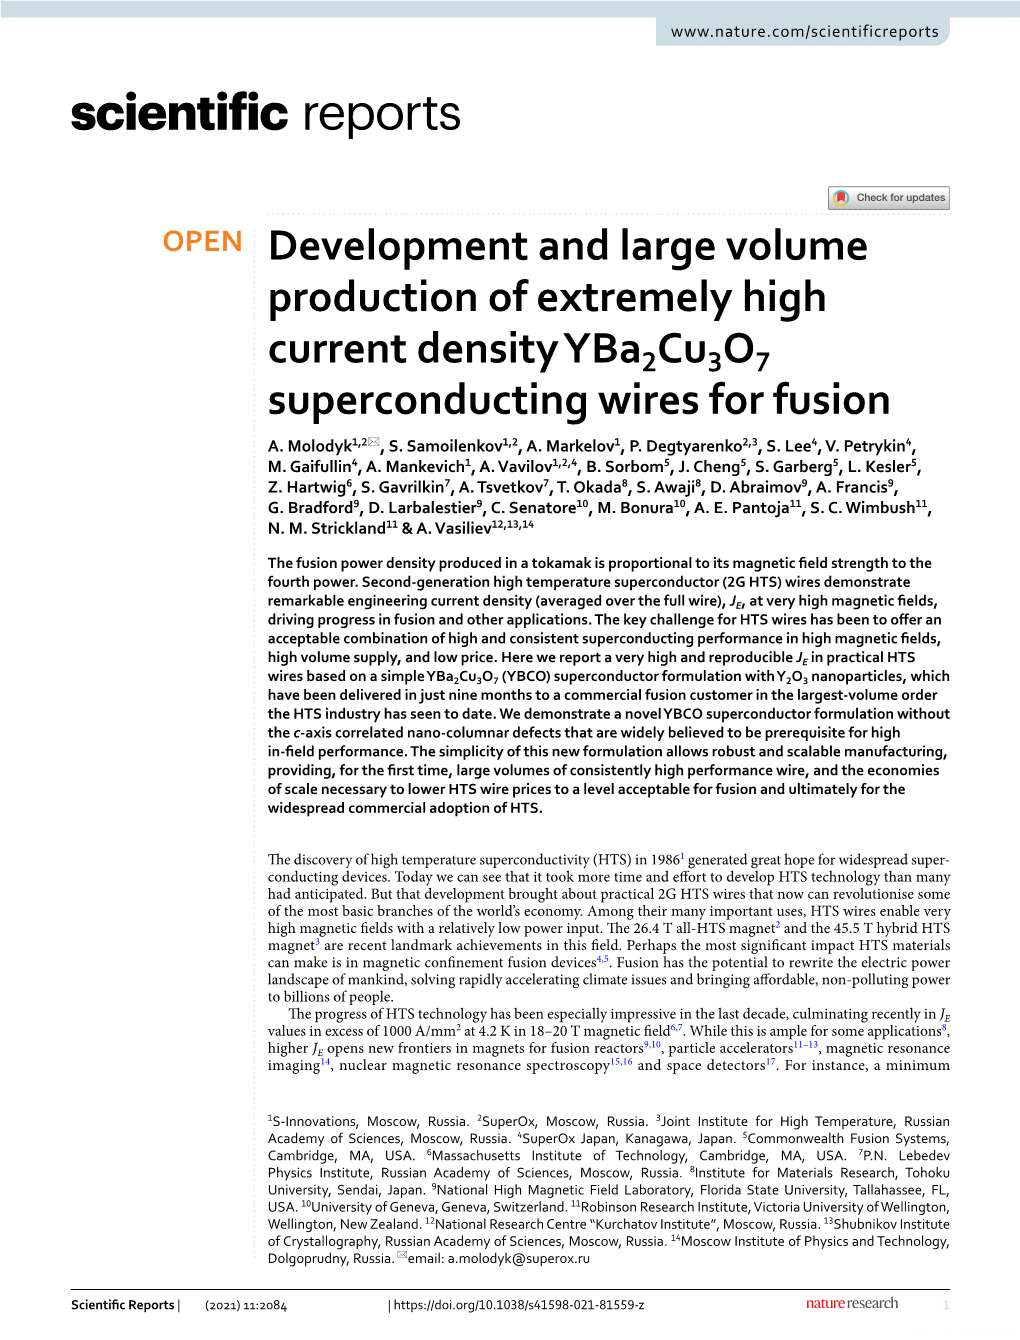 Development and Large Volume Production of Extremely High Current Density ­Yba2cu3o7 Superconducting Wires for Fusion A